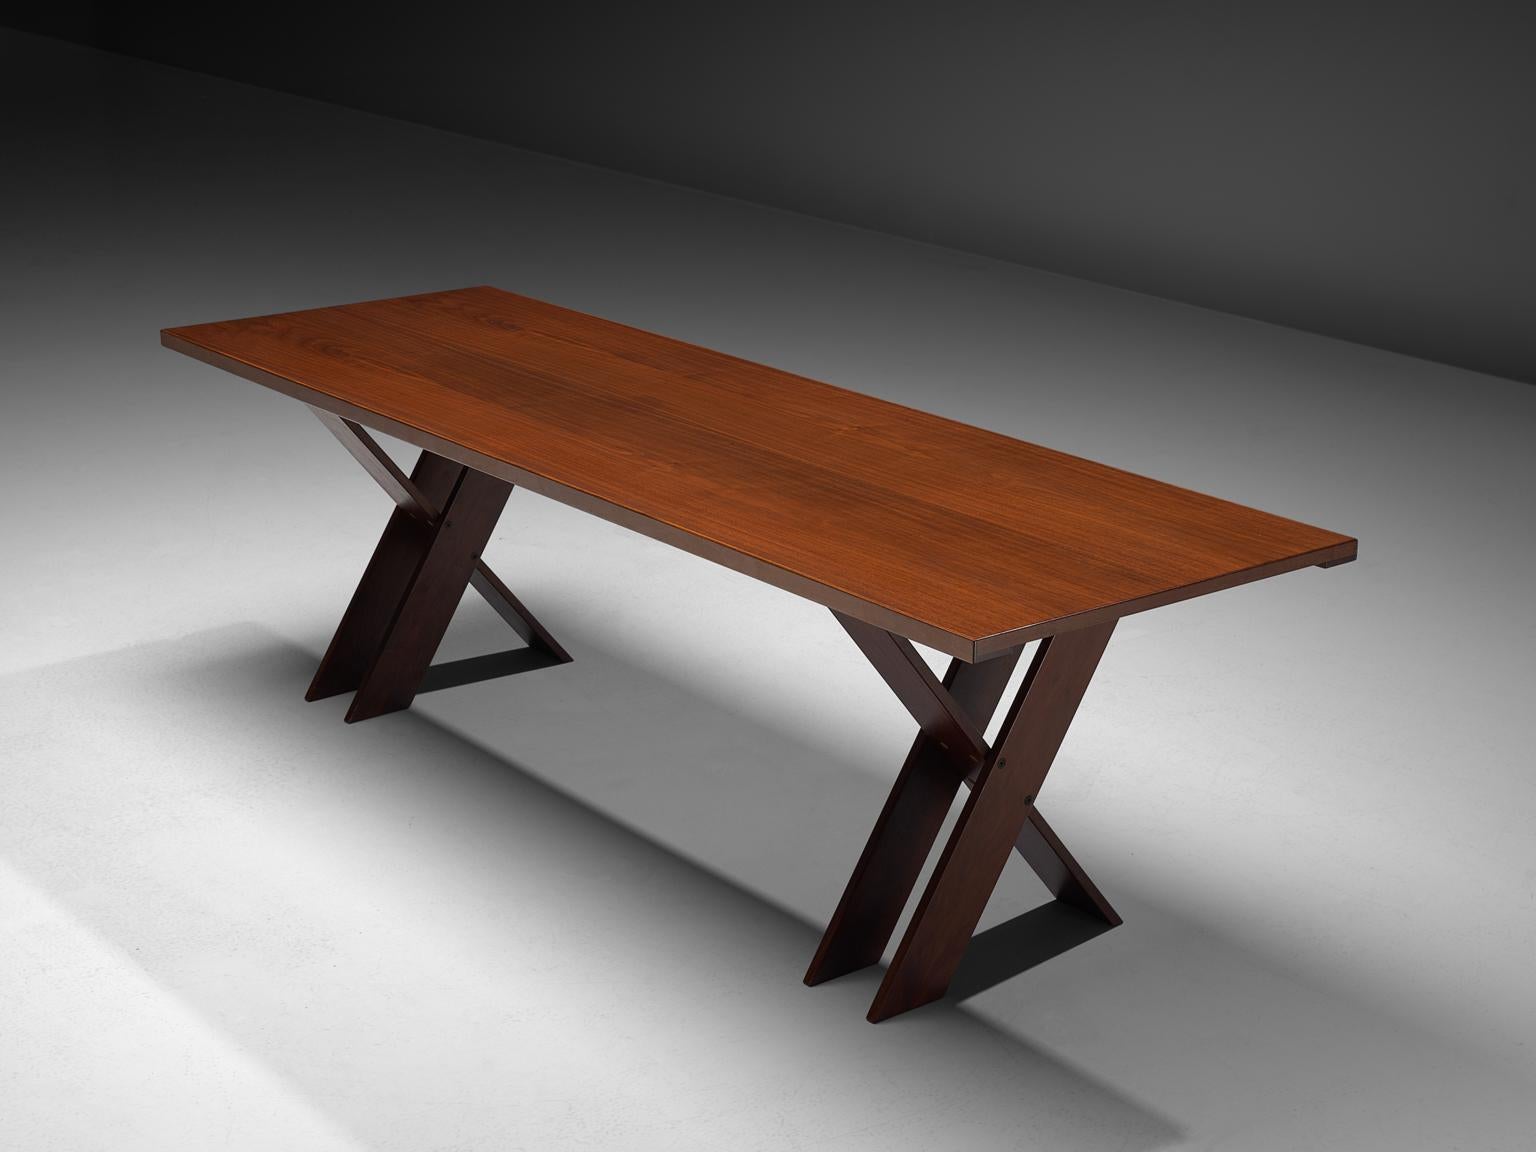 Marco Zanuso for Poggi, TL58 dining table, walnut, 1974.

This dining table is manufactured by Poggi in the 1974. It features crossed, double legs that give the table an architectural appearance. The table is made of high quality walnut wood, which